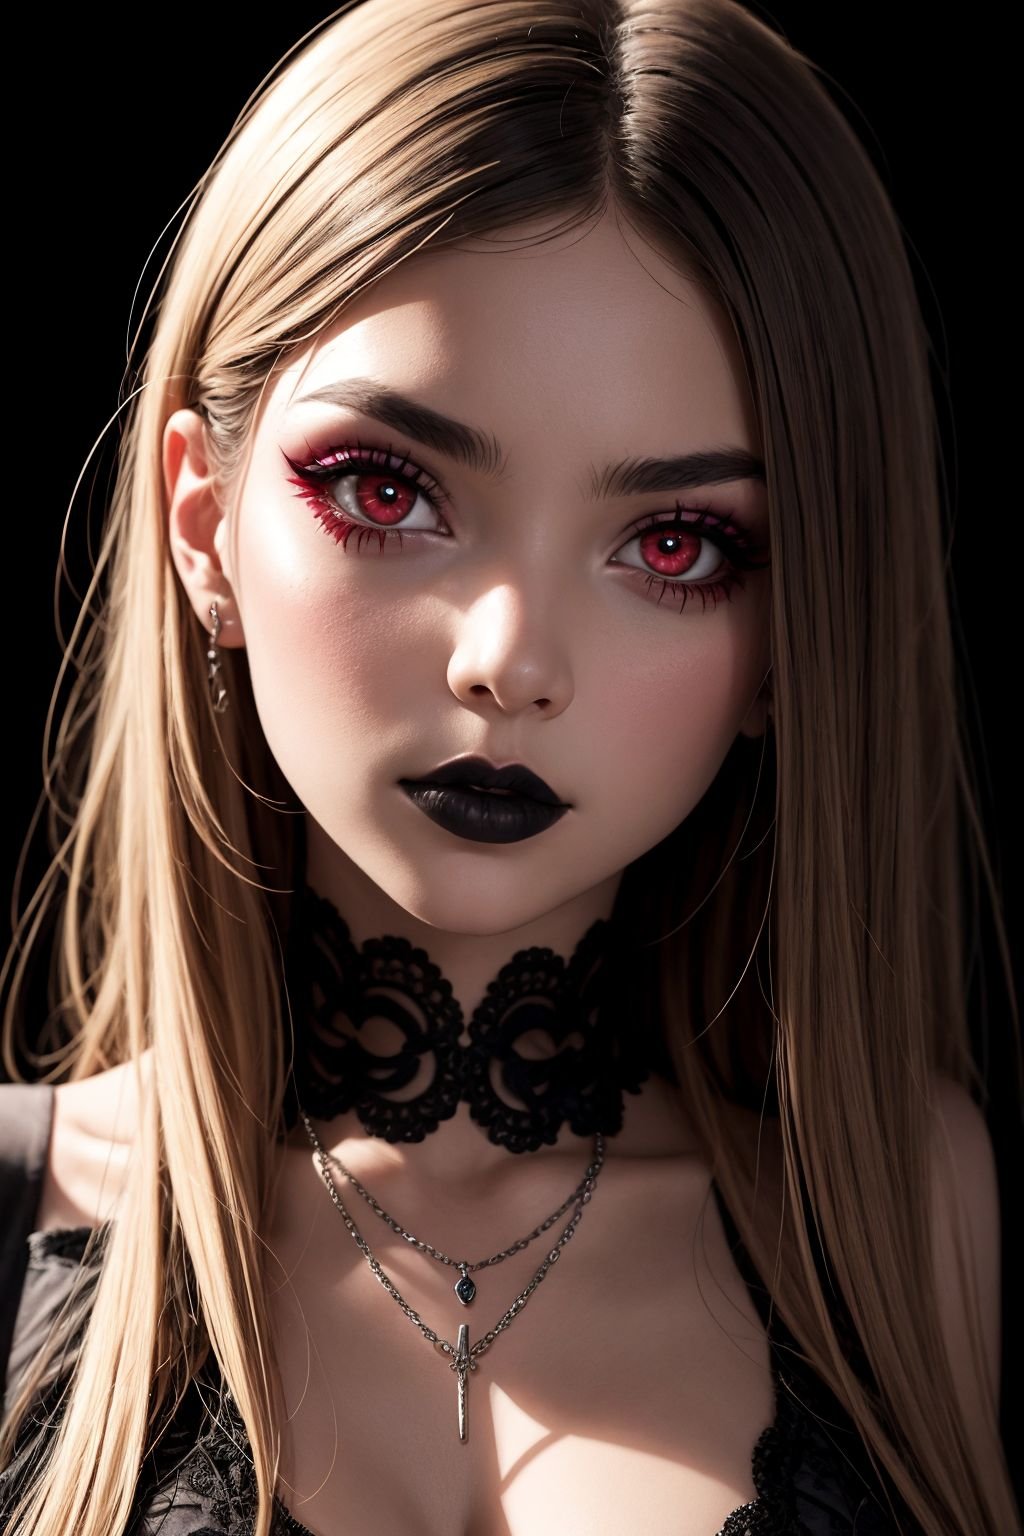 Goth girl 1girl,solo,long hair,looking at viewer,red eyes,jewelry,necklace,makeup,lipstick,black background,portrait,glowing eyes